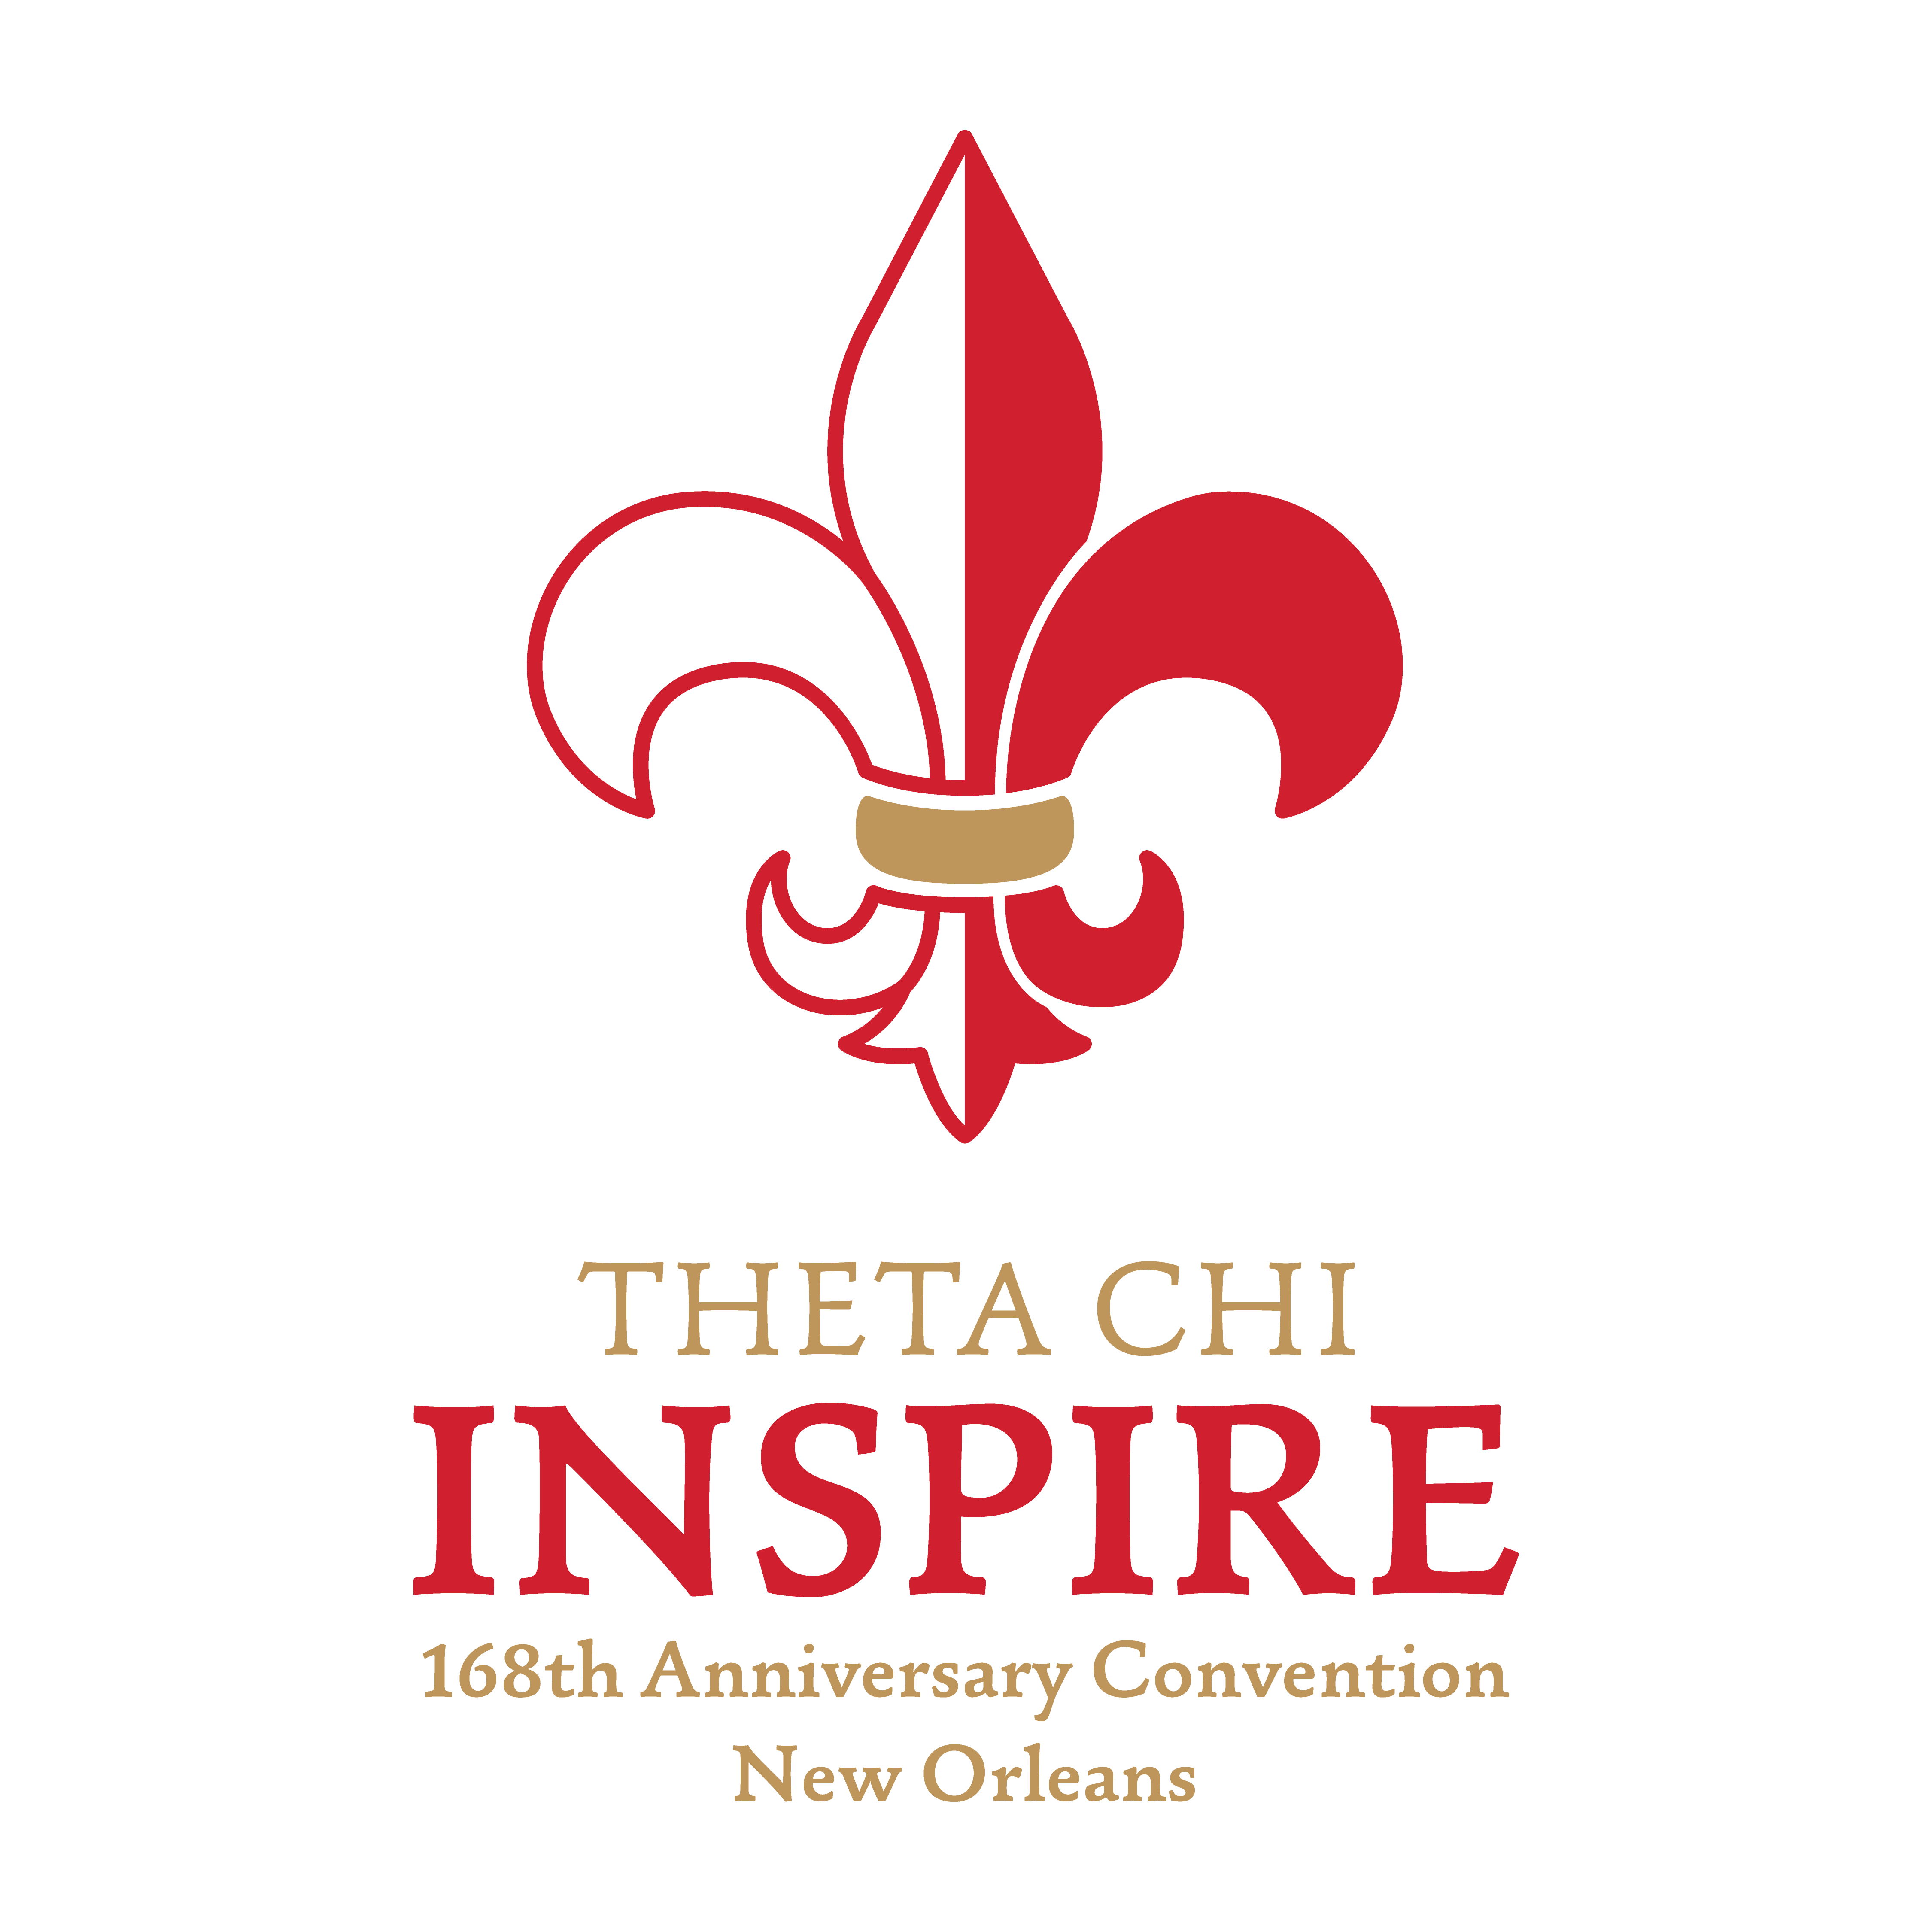 Image for 168th Anniversary Convention and 41st School of Fraternity Practices (INSPIRE)